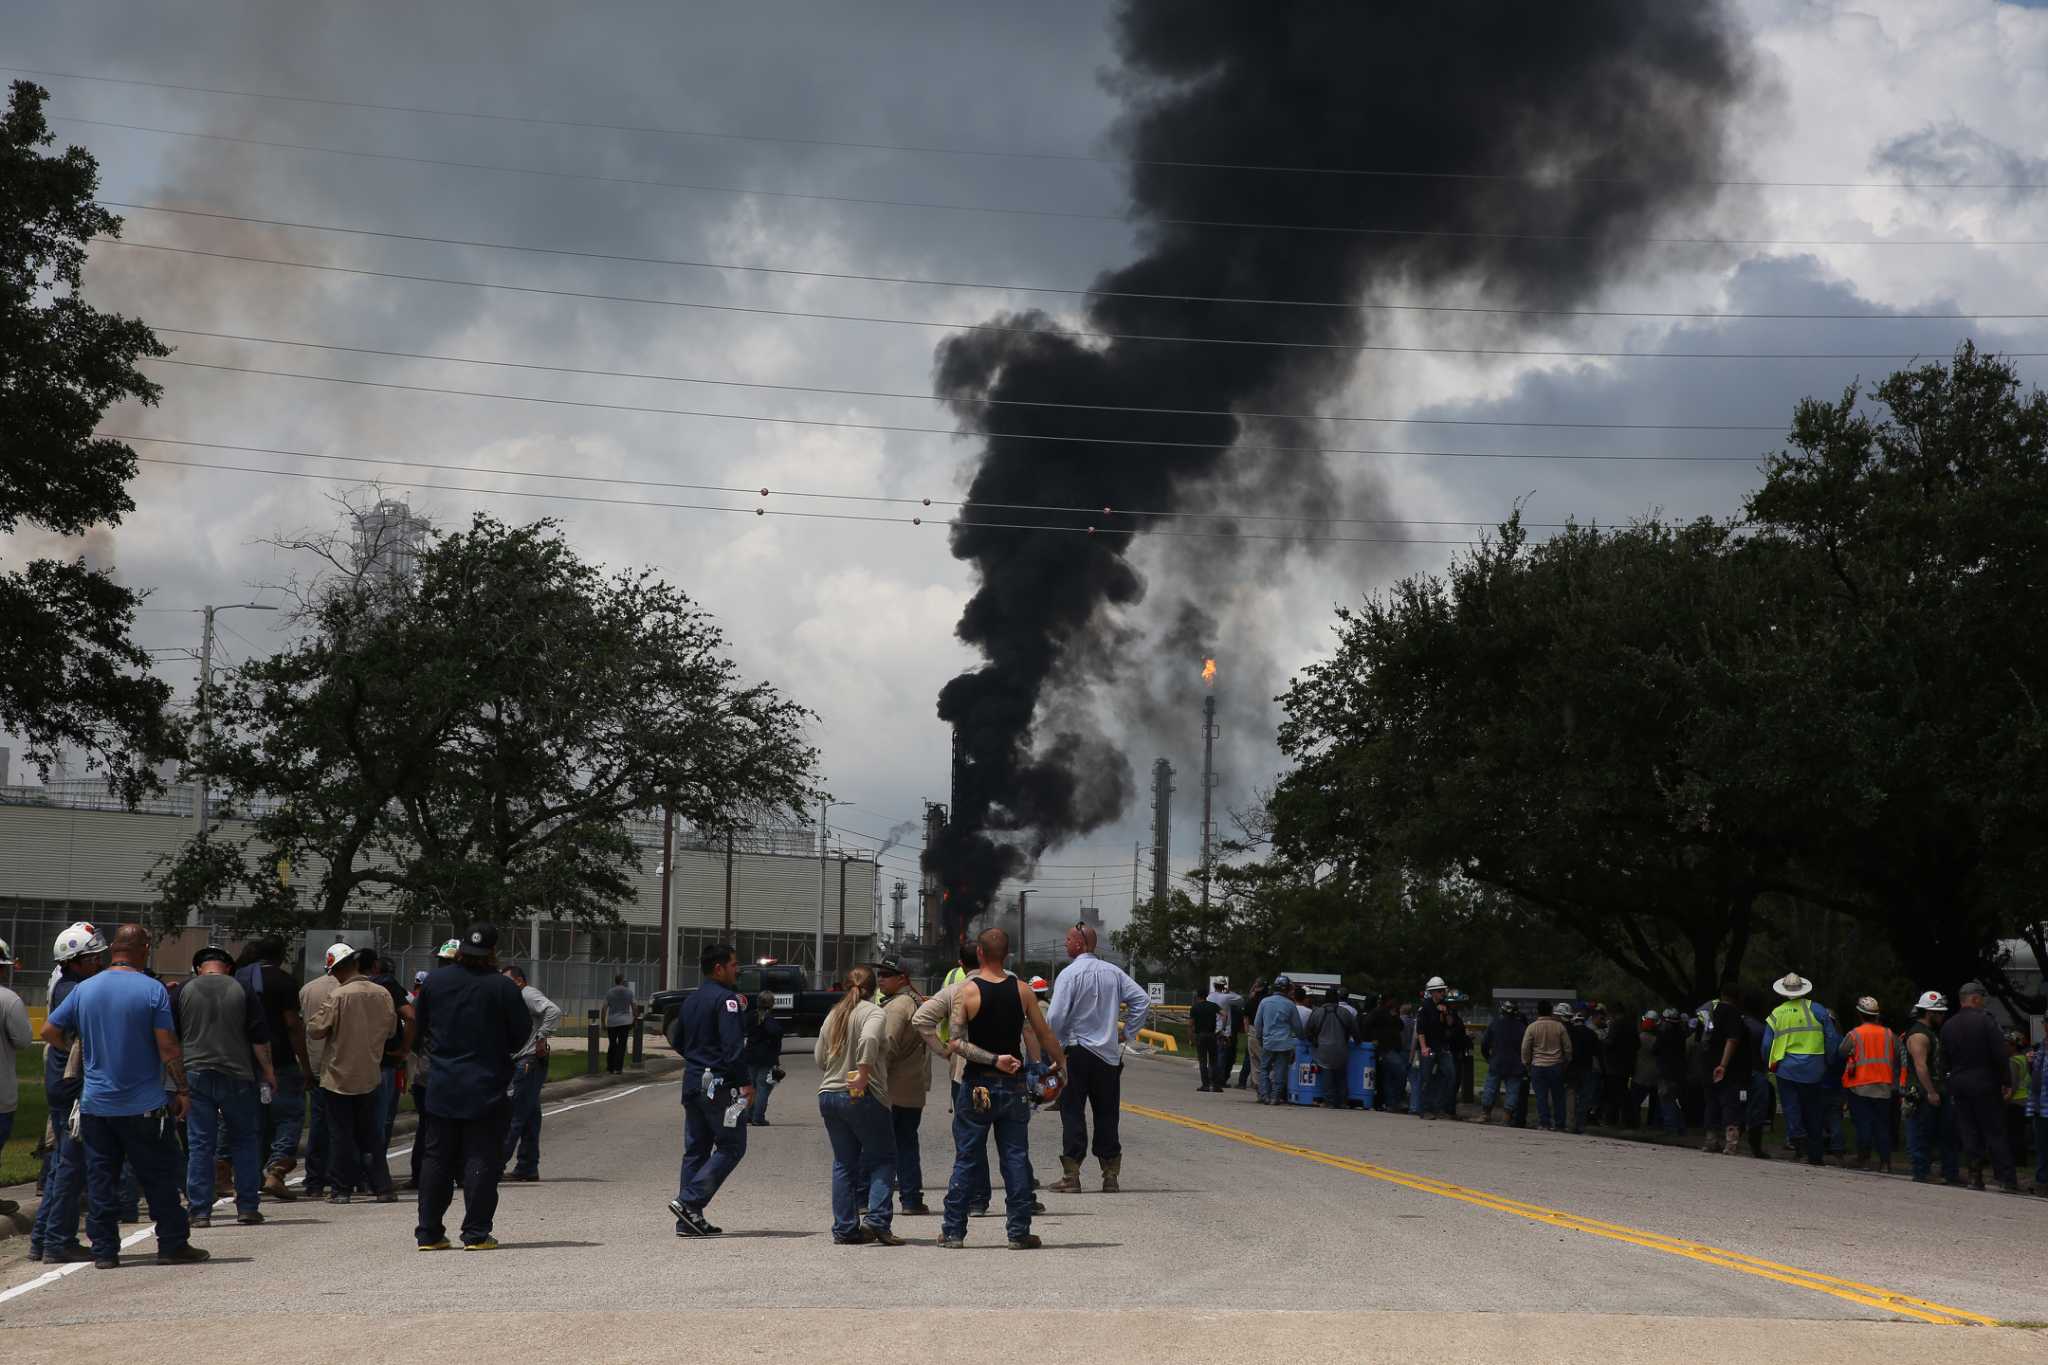 Fire at Exxon plant in Baytown, shelter in place issued - Houston Chronicle2048 x 1365